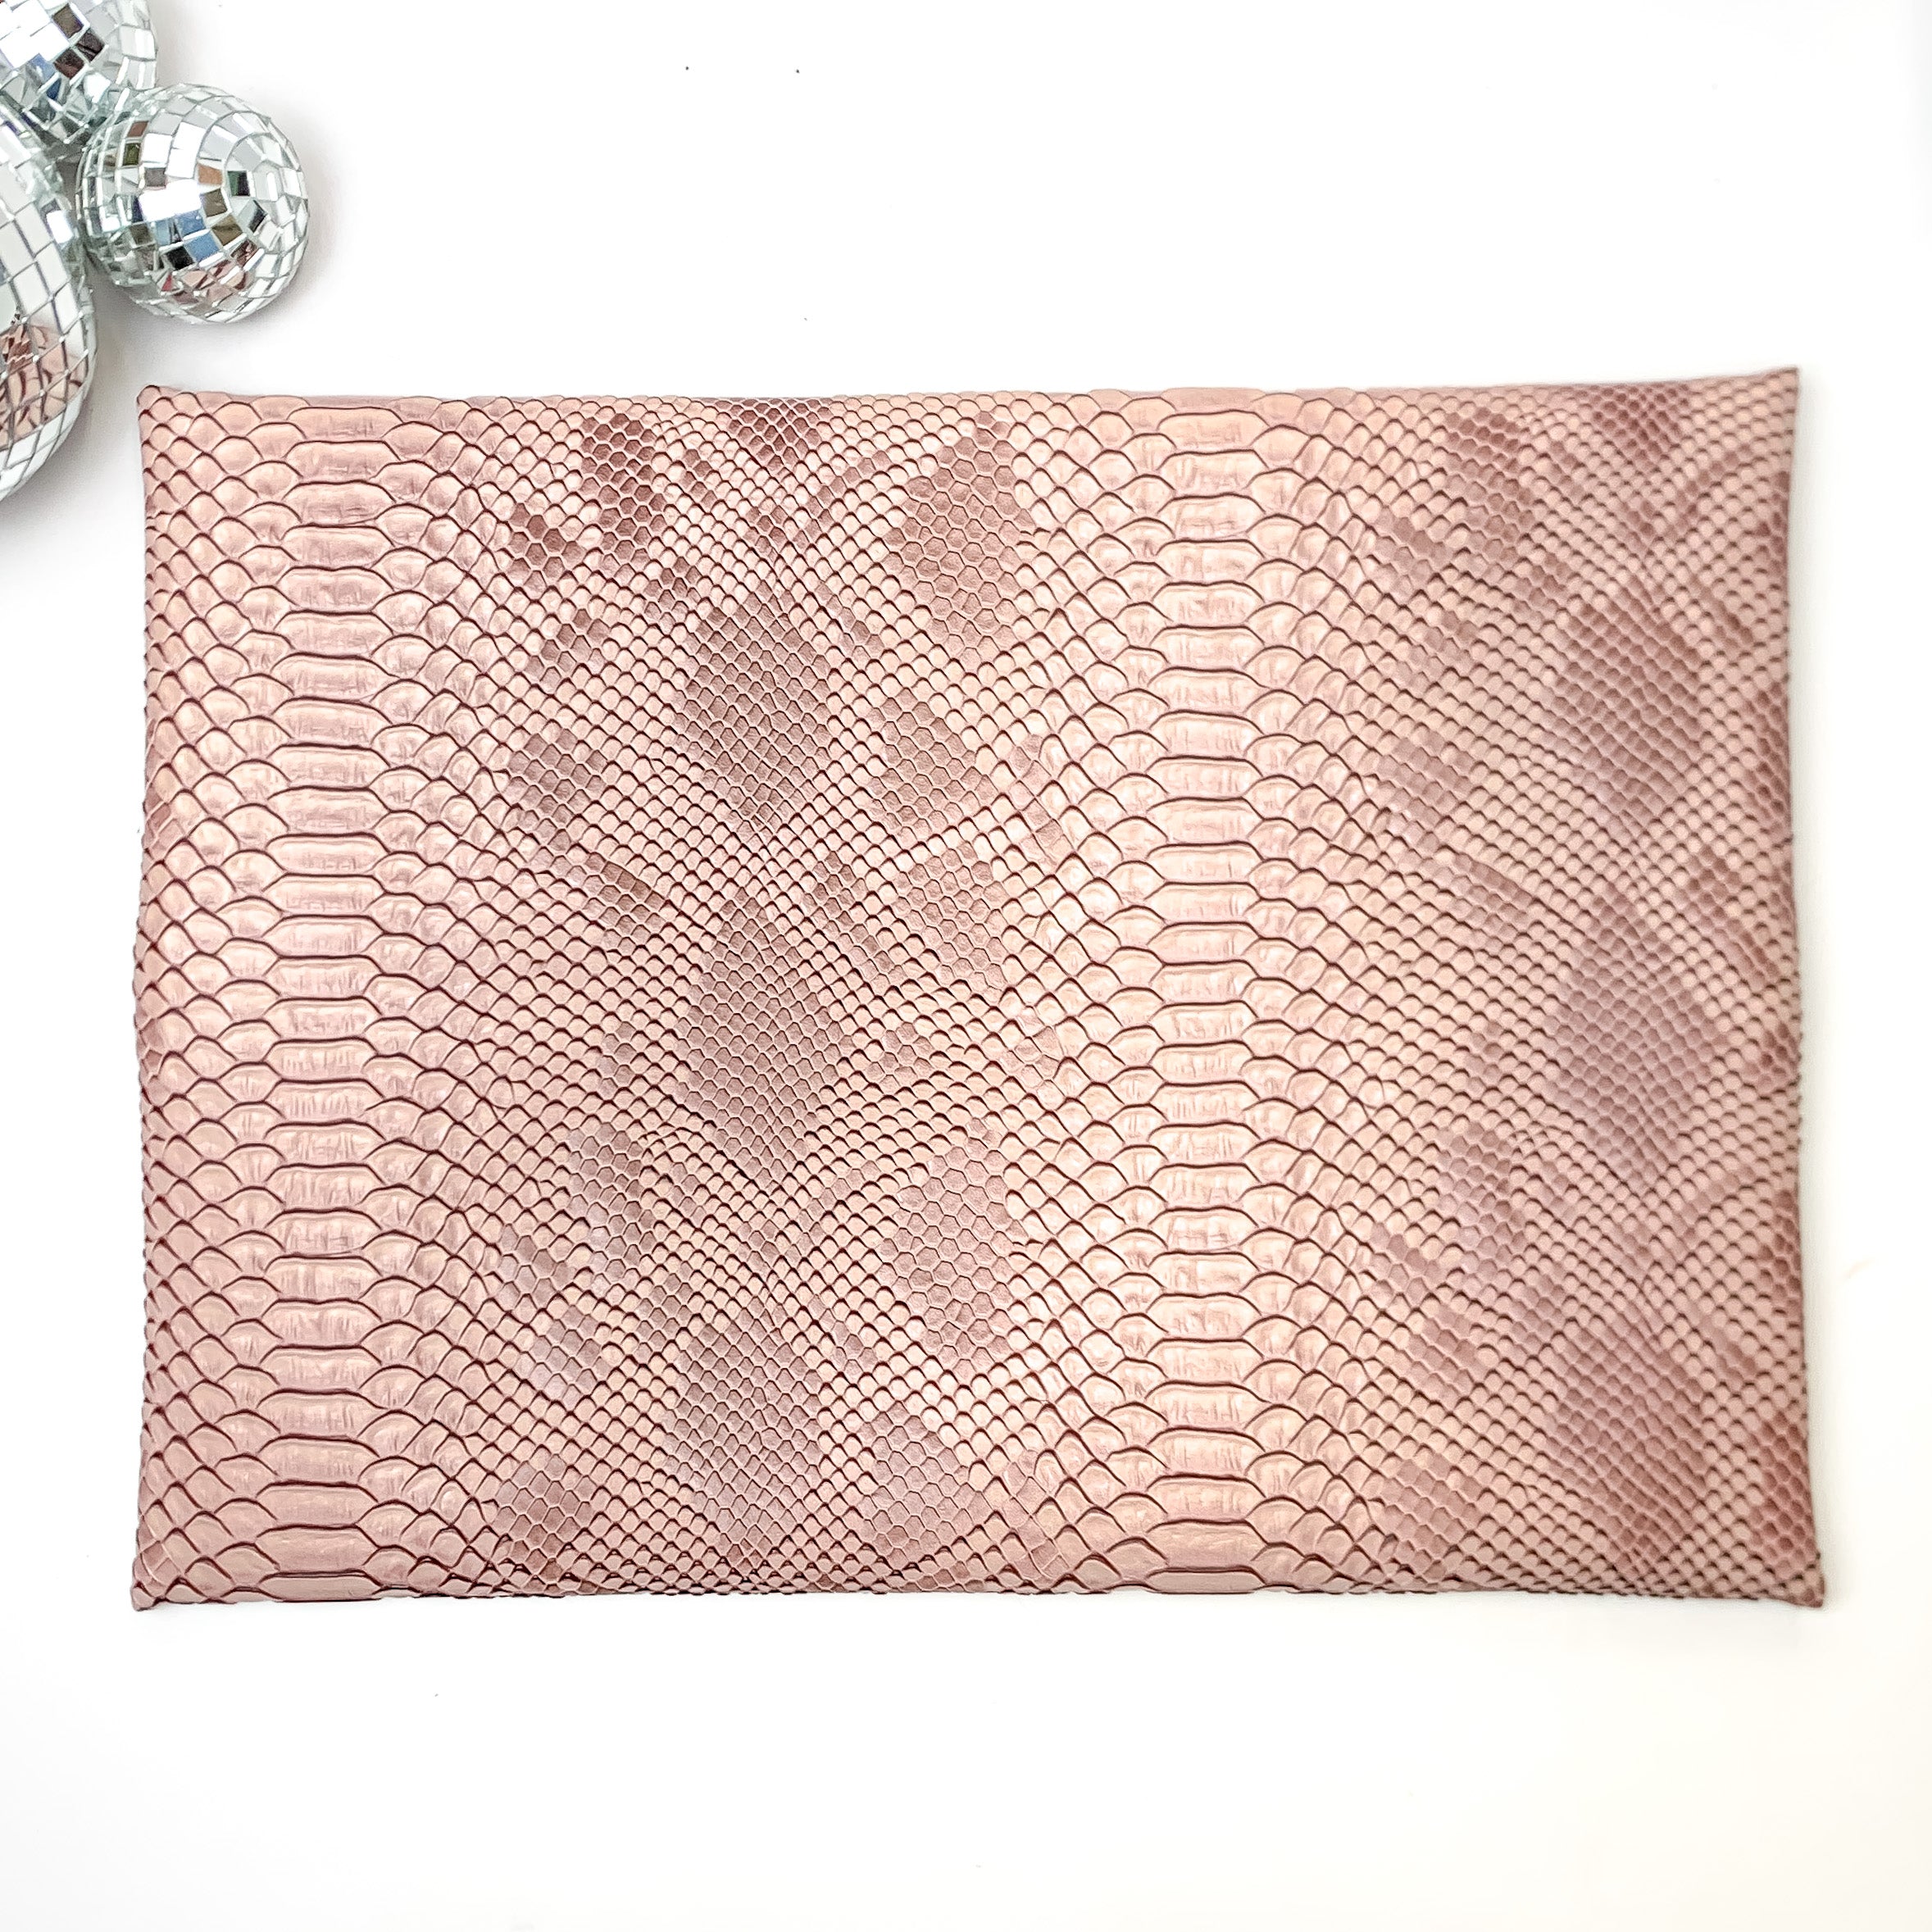 Makeup Junkie | Large Copperazzi Lay Flat Bag in Dusty Pink Snake Print